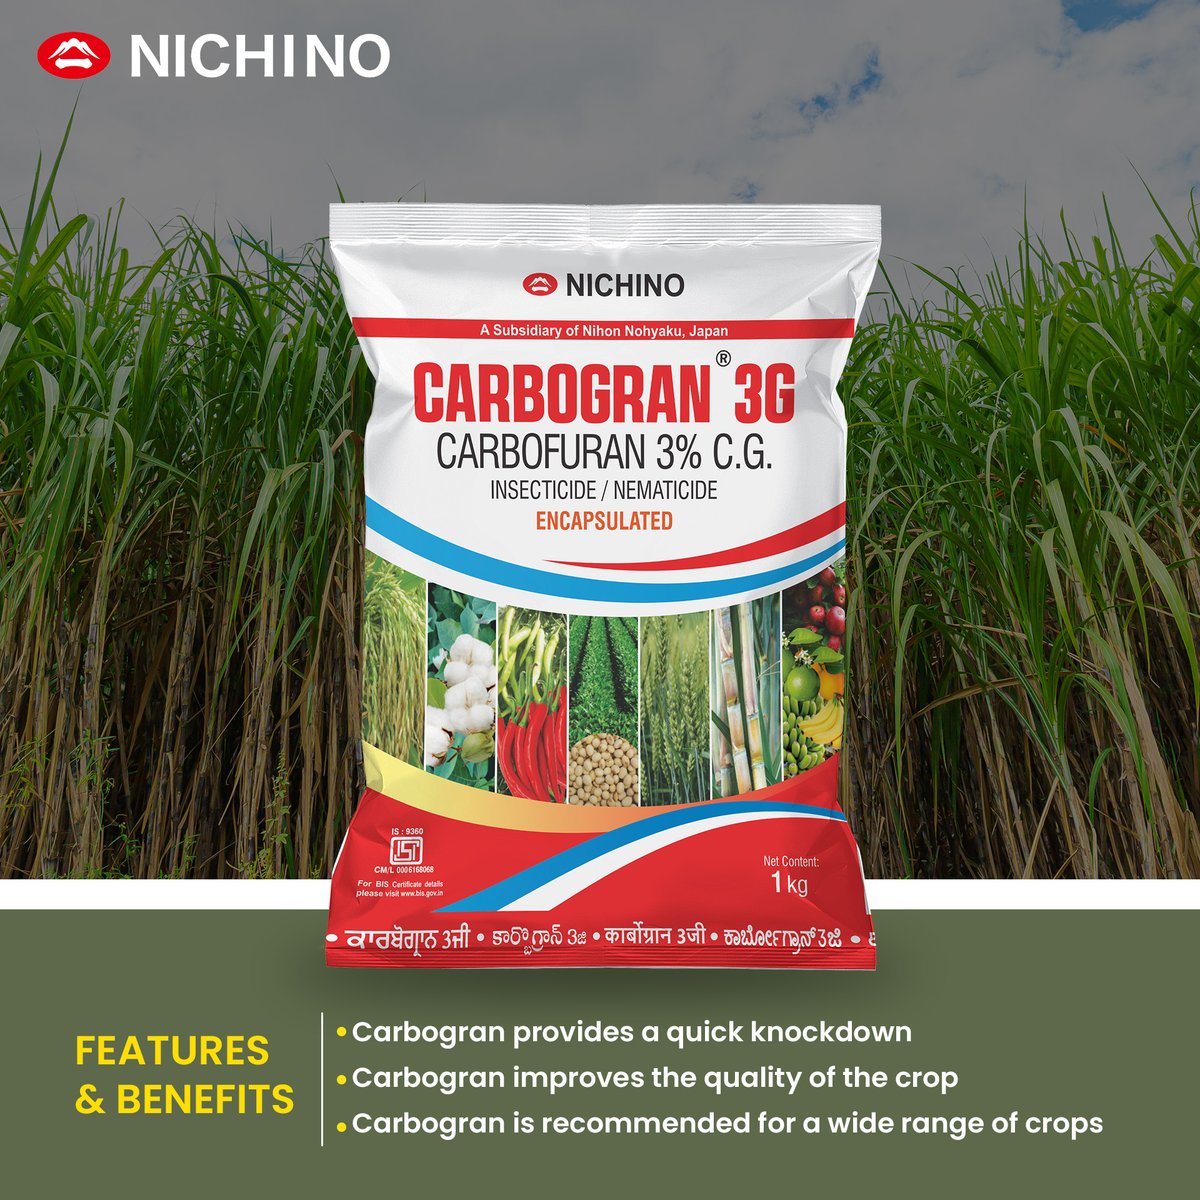 Carbogran has double action that eliminates insects and nematodes.

#pestcontrol #carbogran #farmer #cropprotection #farmlife #Nichinoindia